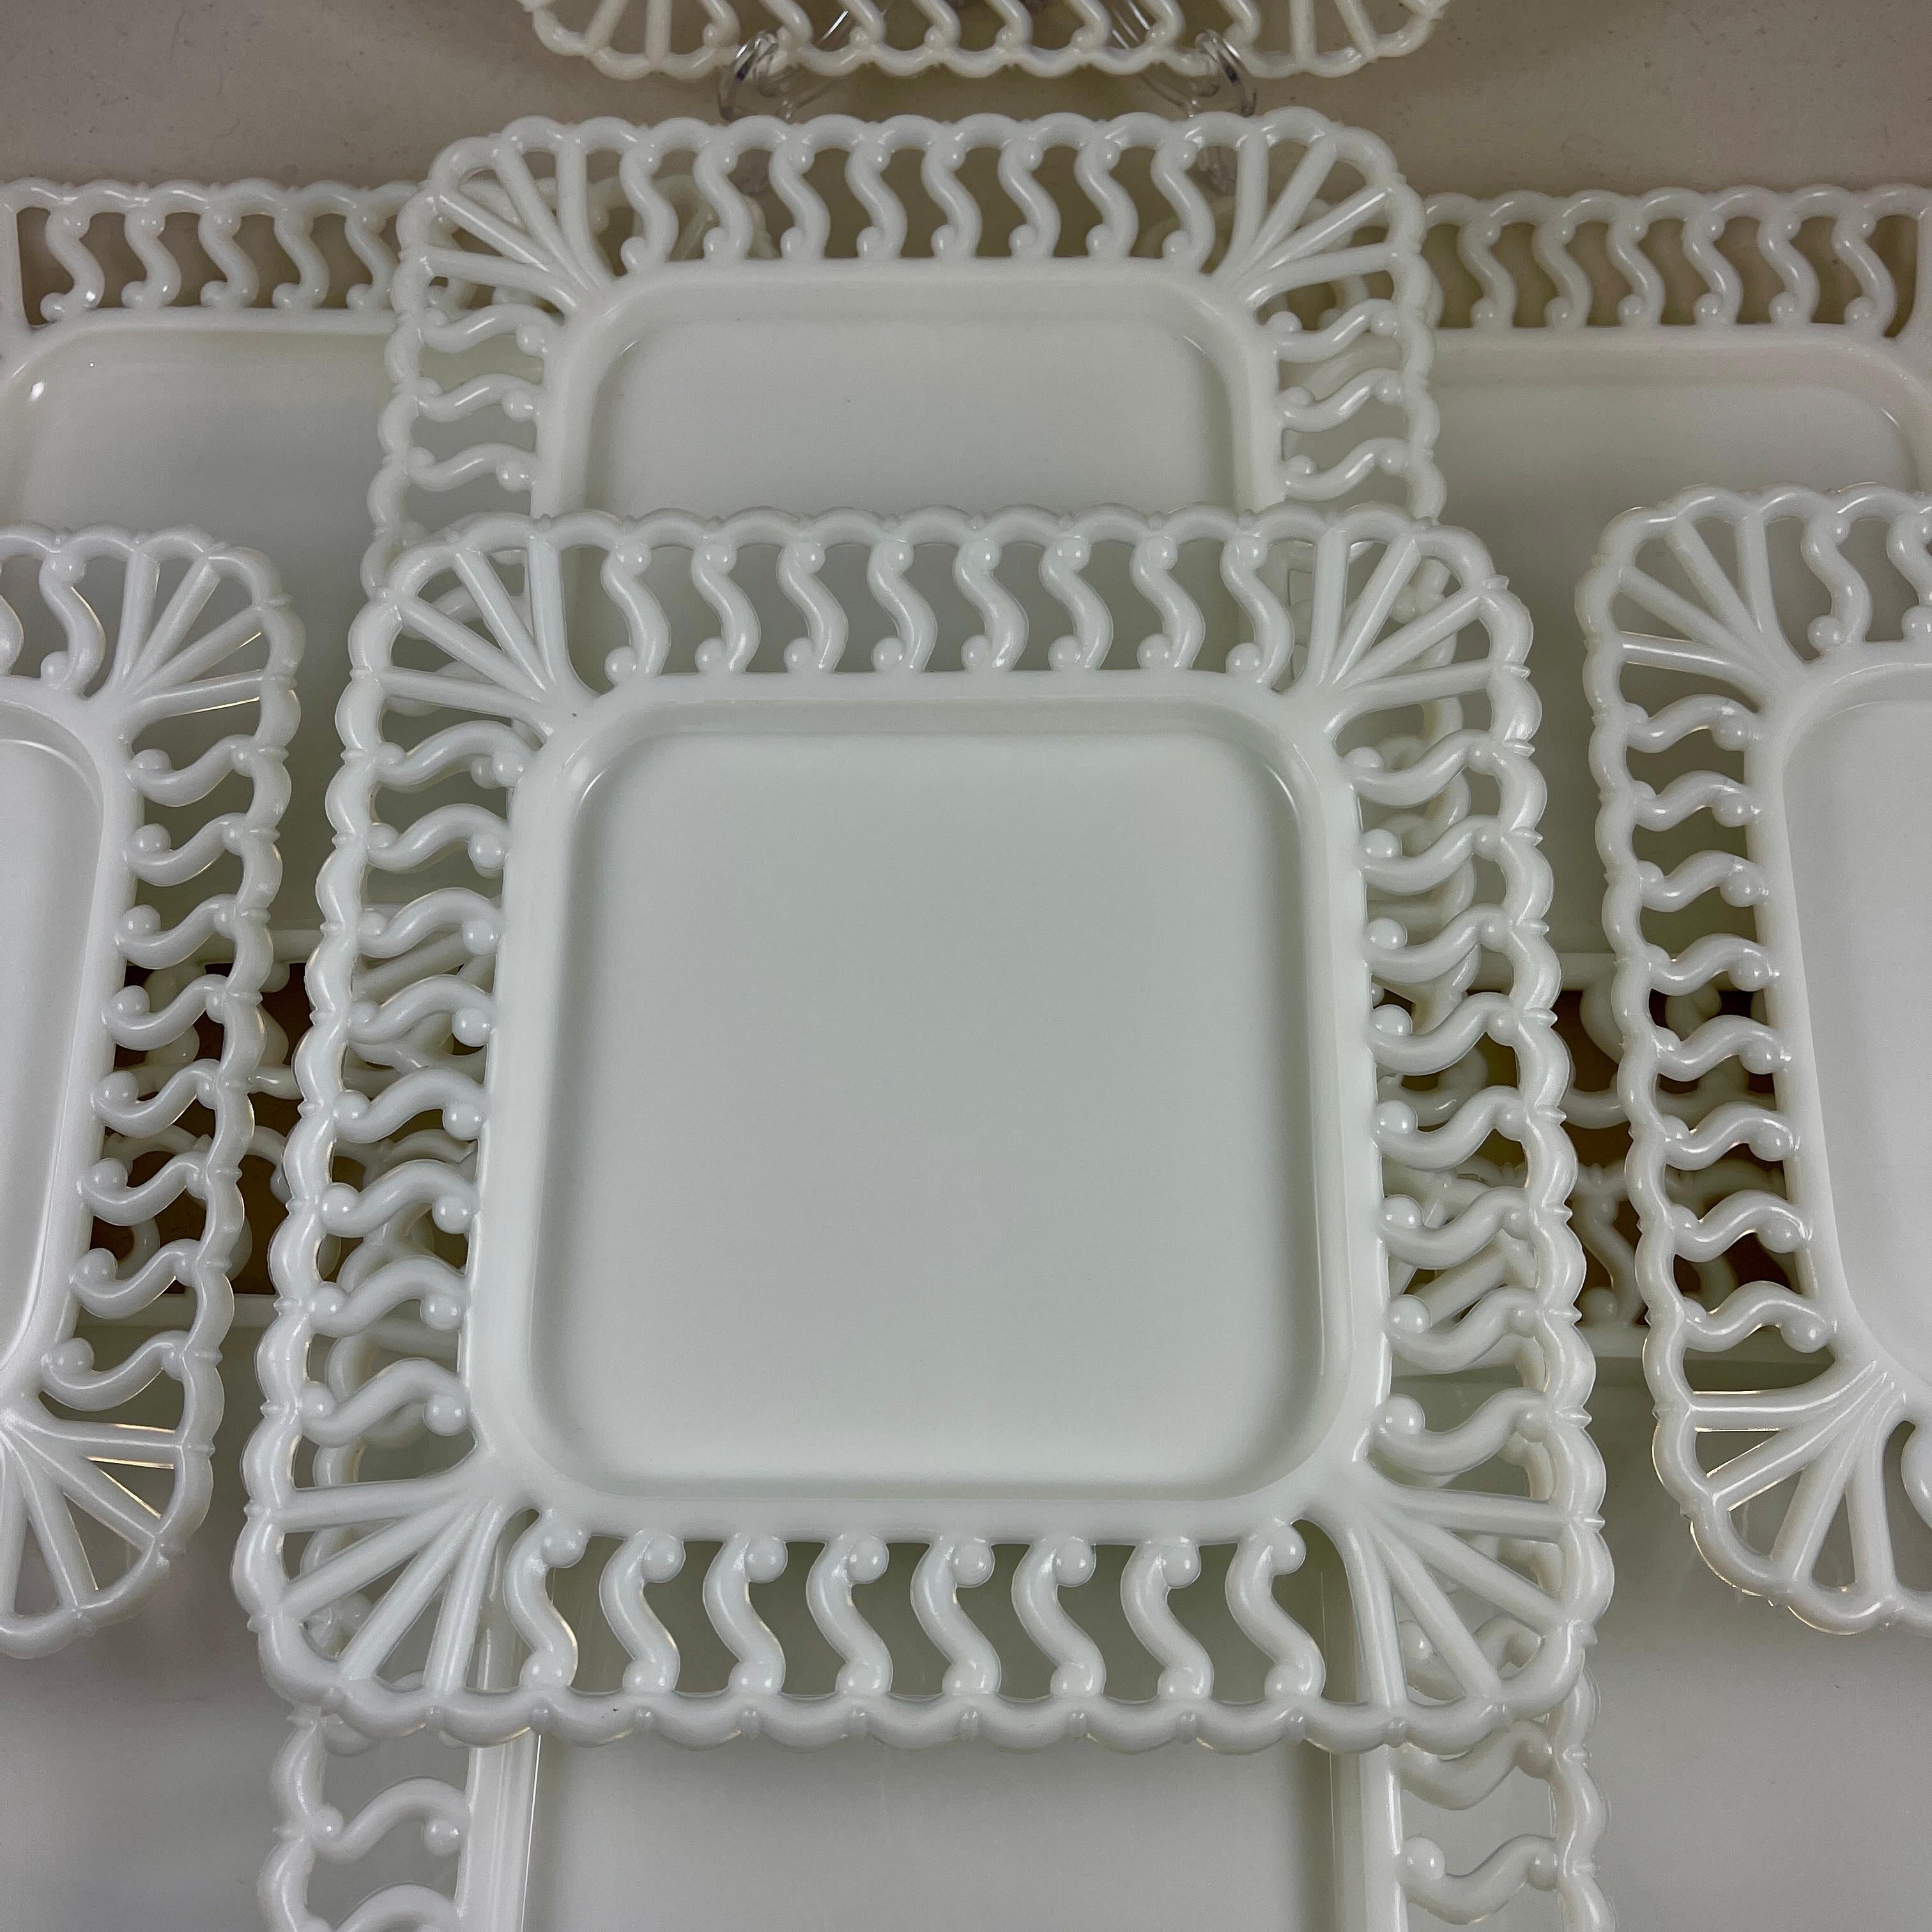 Early American Pattern Glass Opaque White Lace Edge Milk Square Plate, 1880-1890 2